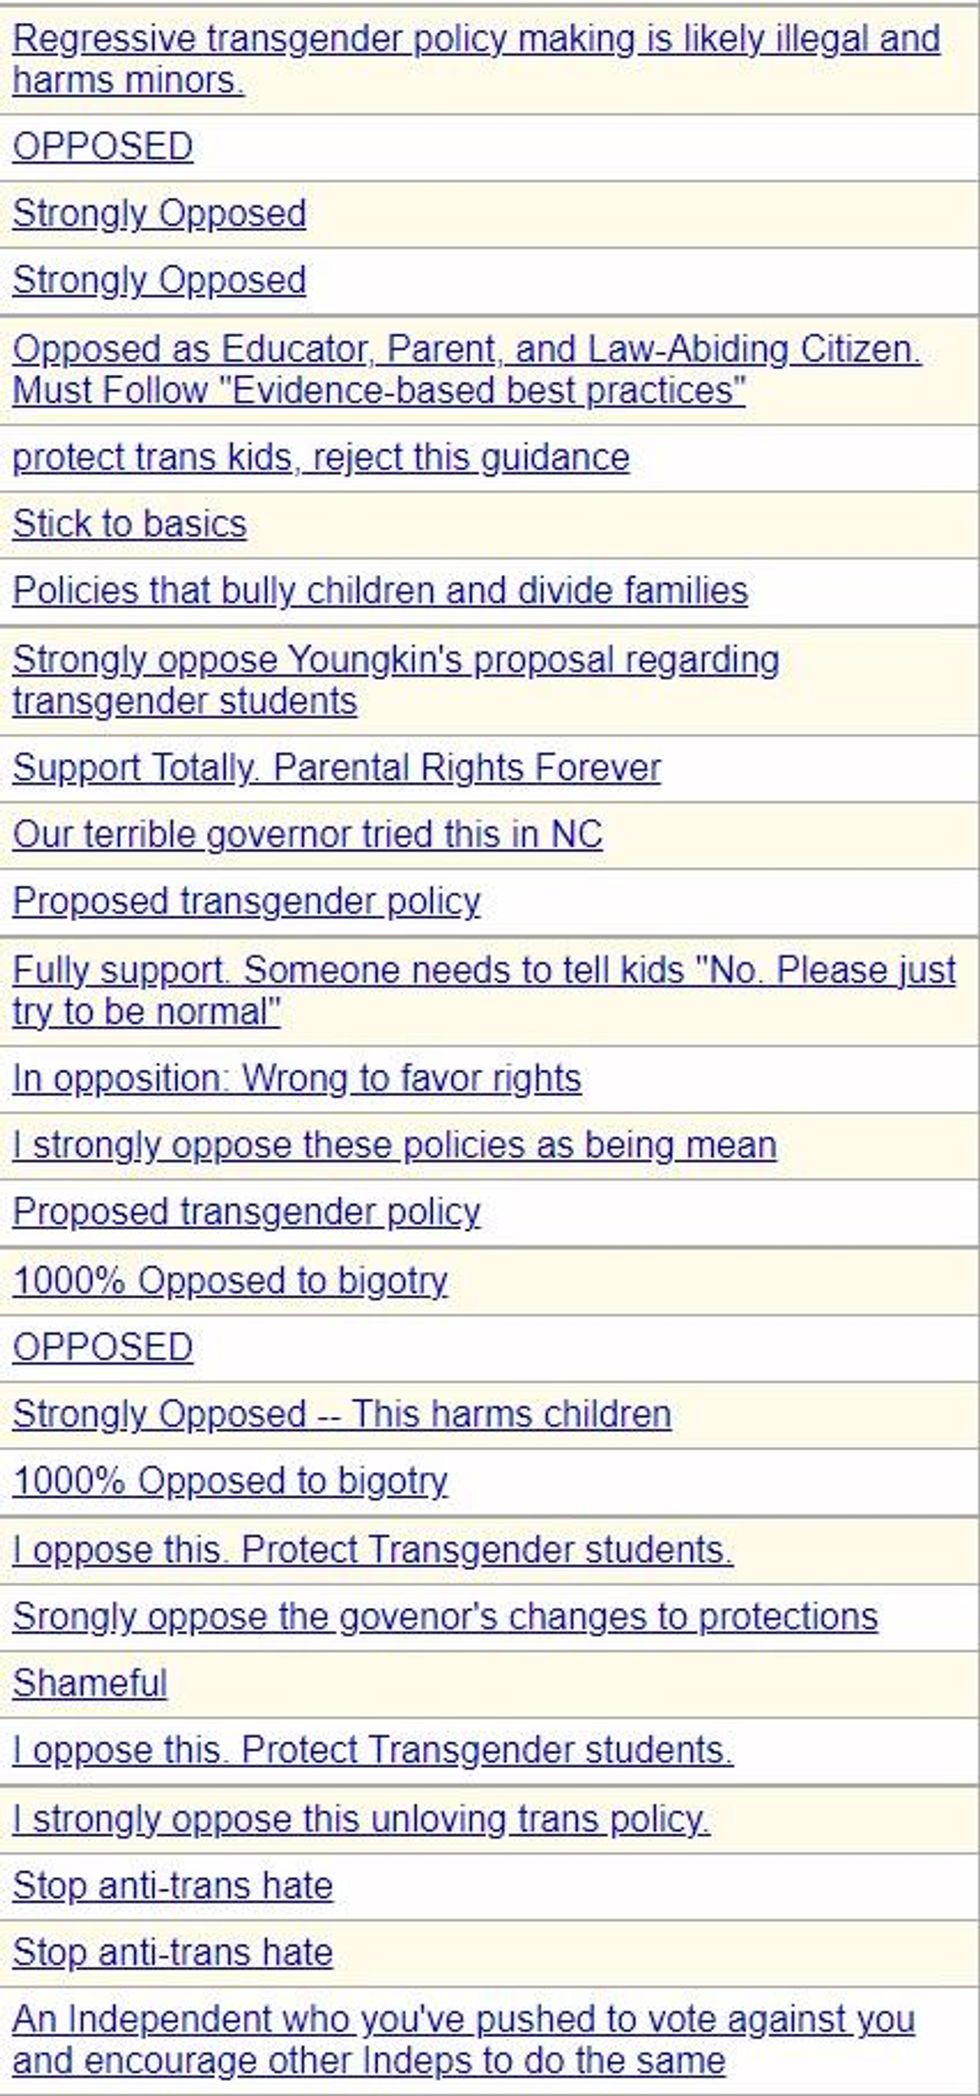 A collection of comment headings stating opposition to the new policy. Samples: Let Students Be Themselves, I STRONGLY oppose this! ,Opposed as Educator, Parent, and Law-Abiding Citizen. Must Follow "Evidence-based best practices", protect trans kids, reject this guidance, , Support Totally. Parental Rights Forever, 